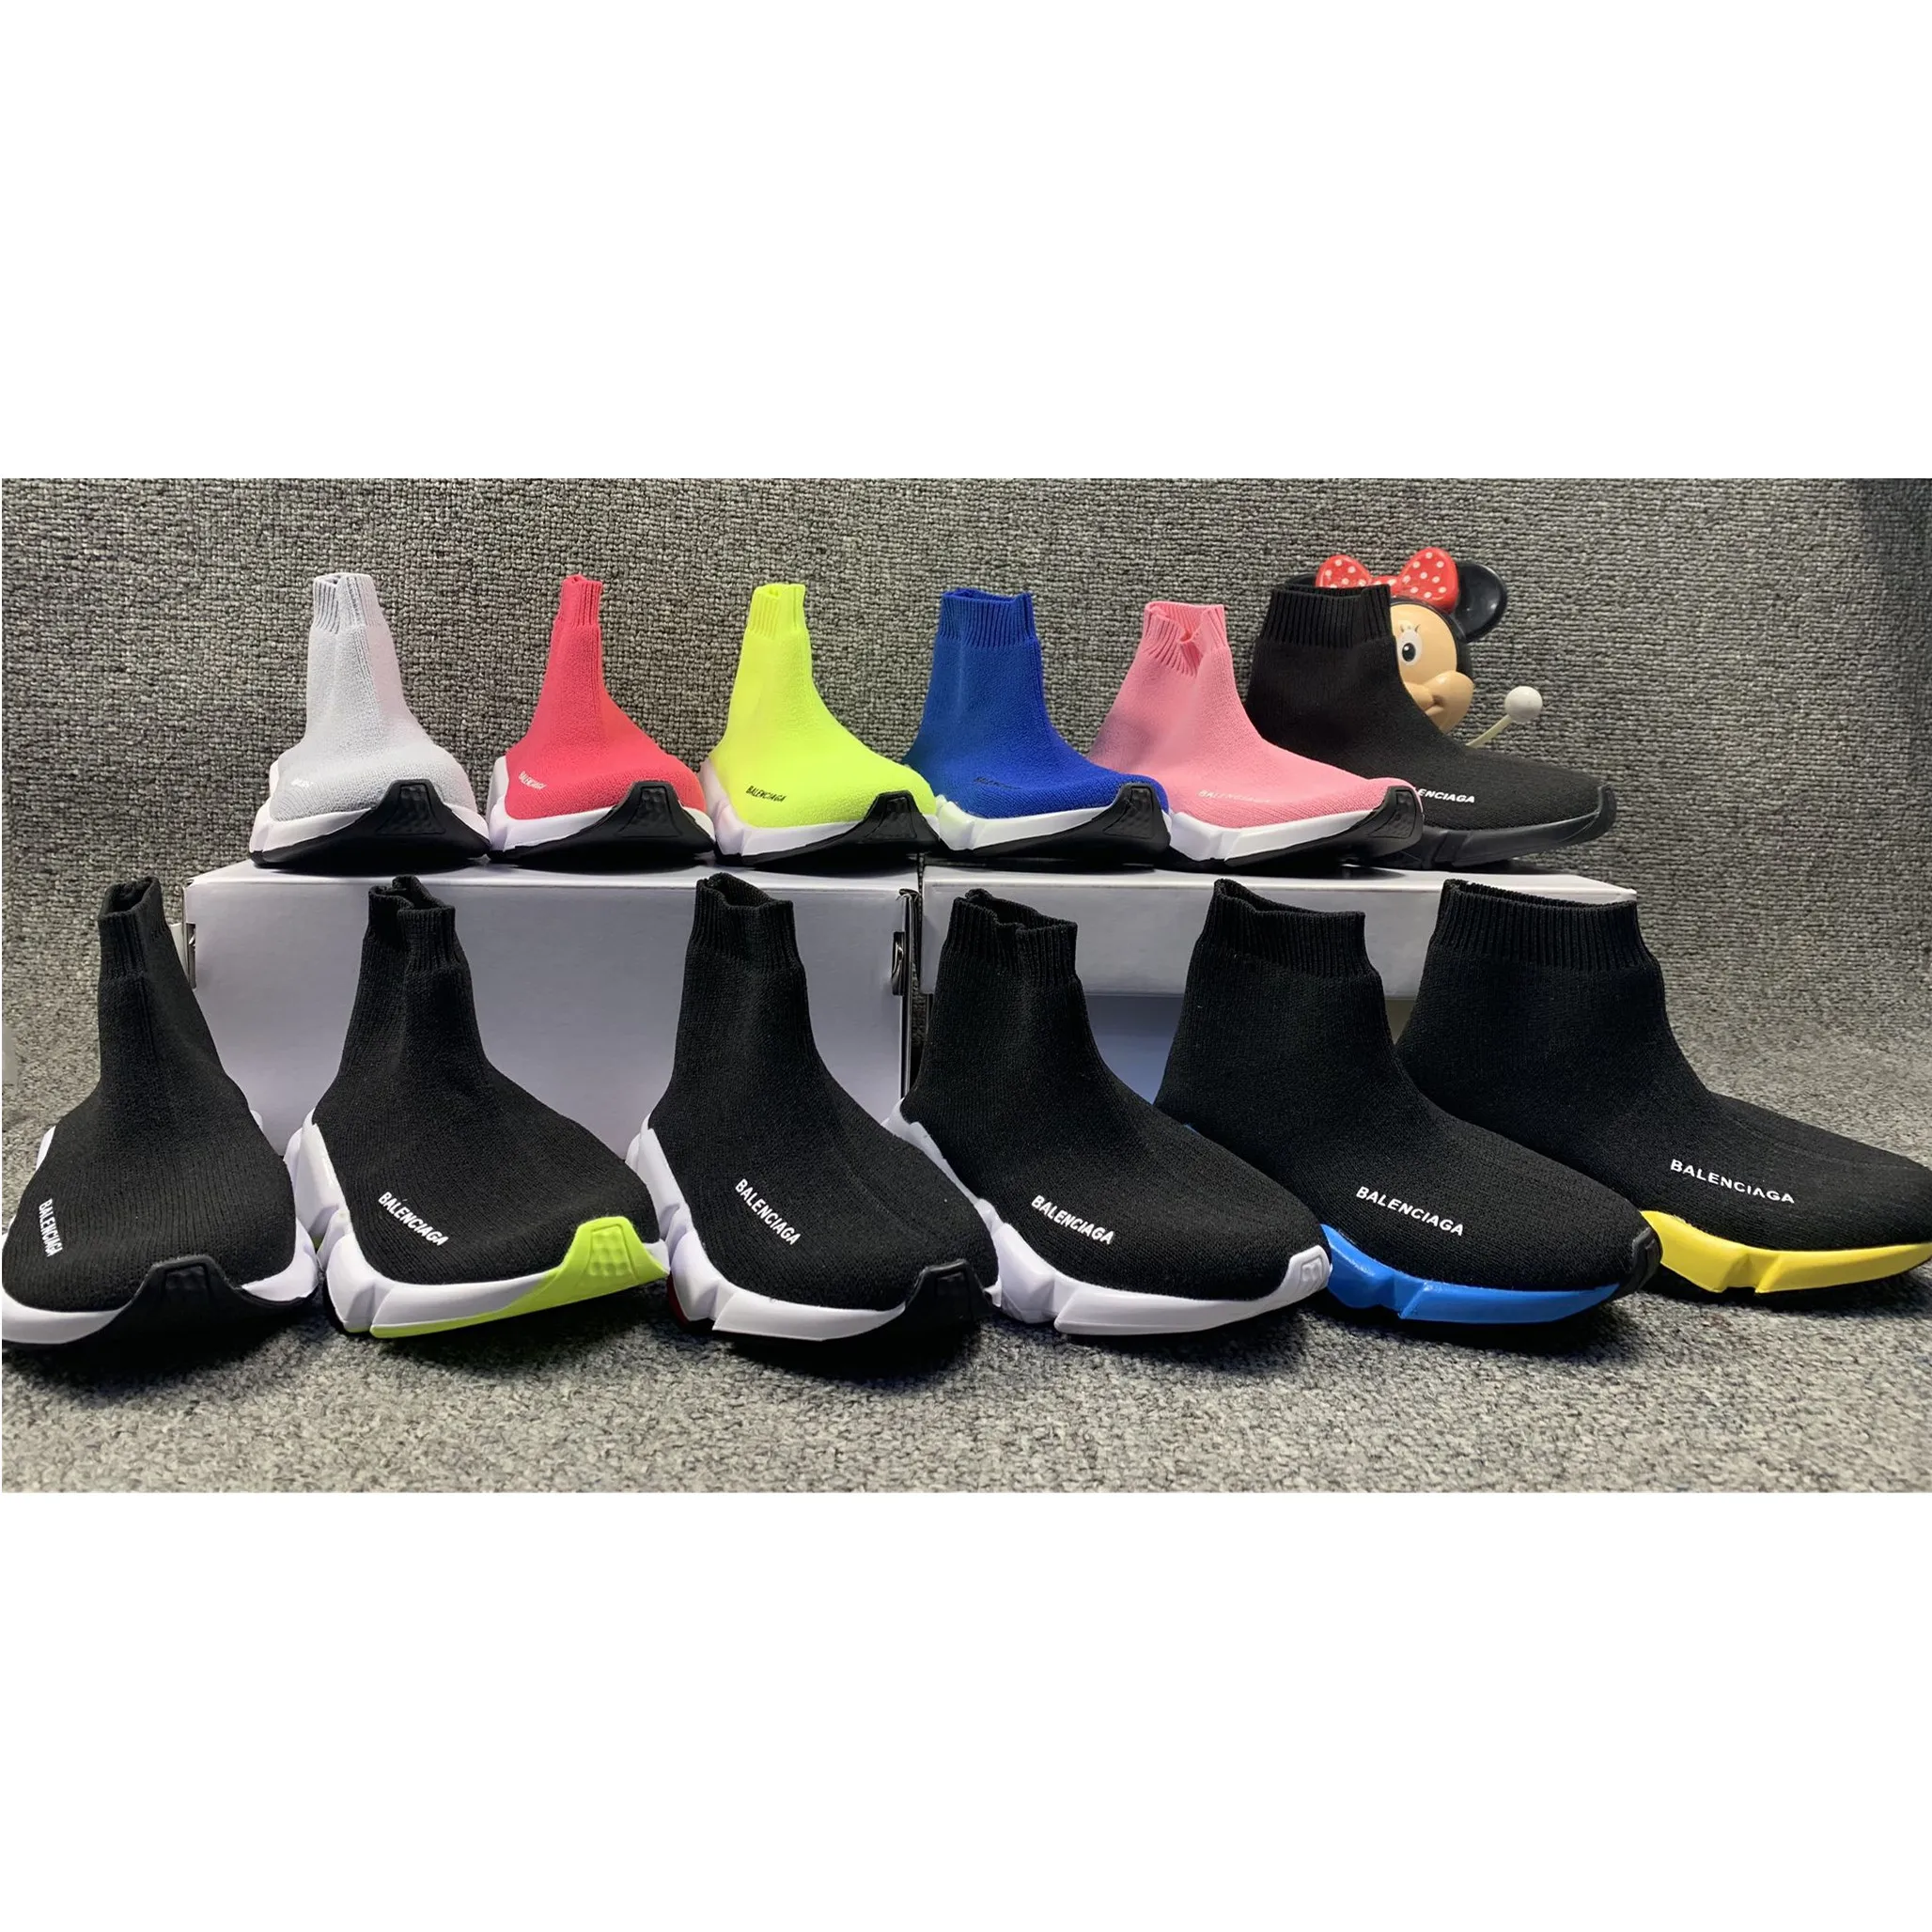 

Kids Speed Runner Shoes Boys Socks Shoes Boots Child Trainers Teenage Light and comfortable Sneakers Running Chaussures